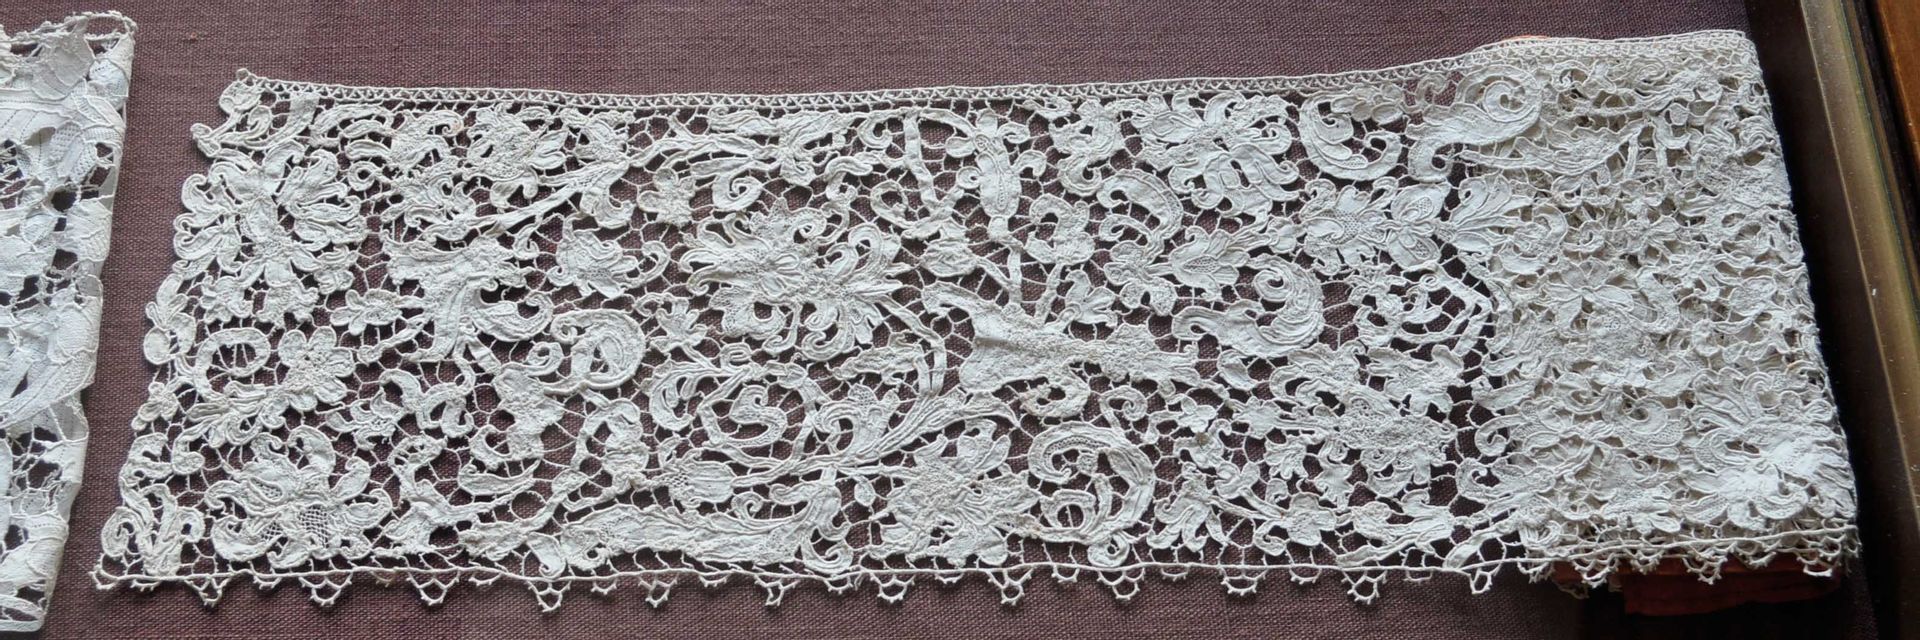 Burano Lace Museum